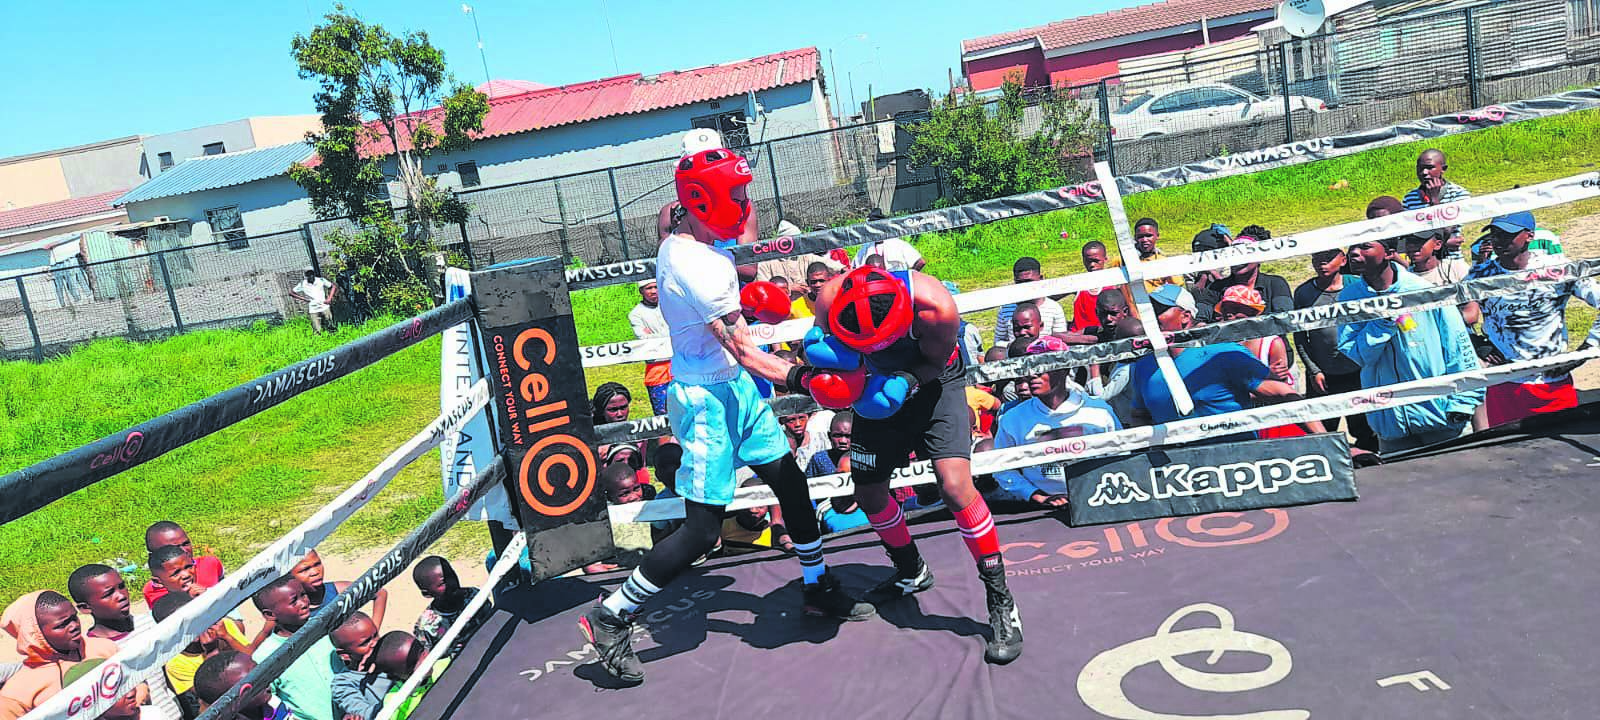 Luyolo Mvula (right) won a fight against Marco de Koker (left) during a boxing match in Philippi, Western Cape, on Saturday.                                                         Photo by Lulekwa Mbadamane